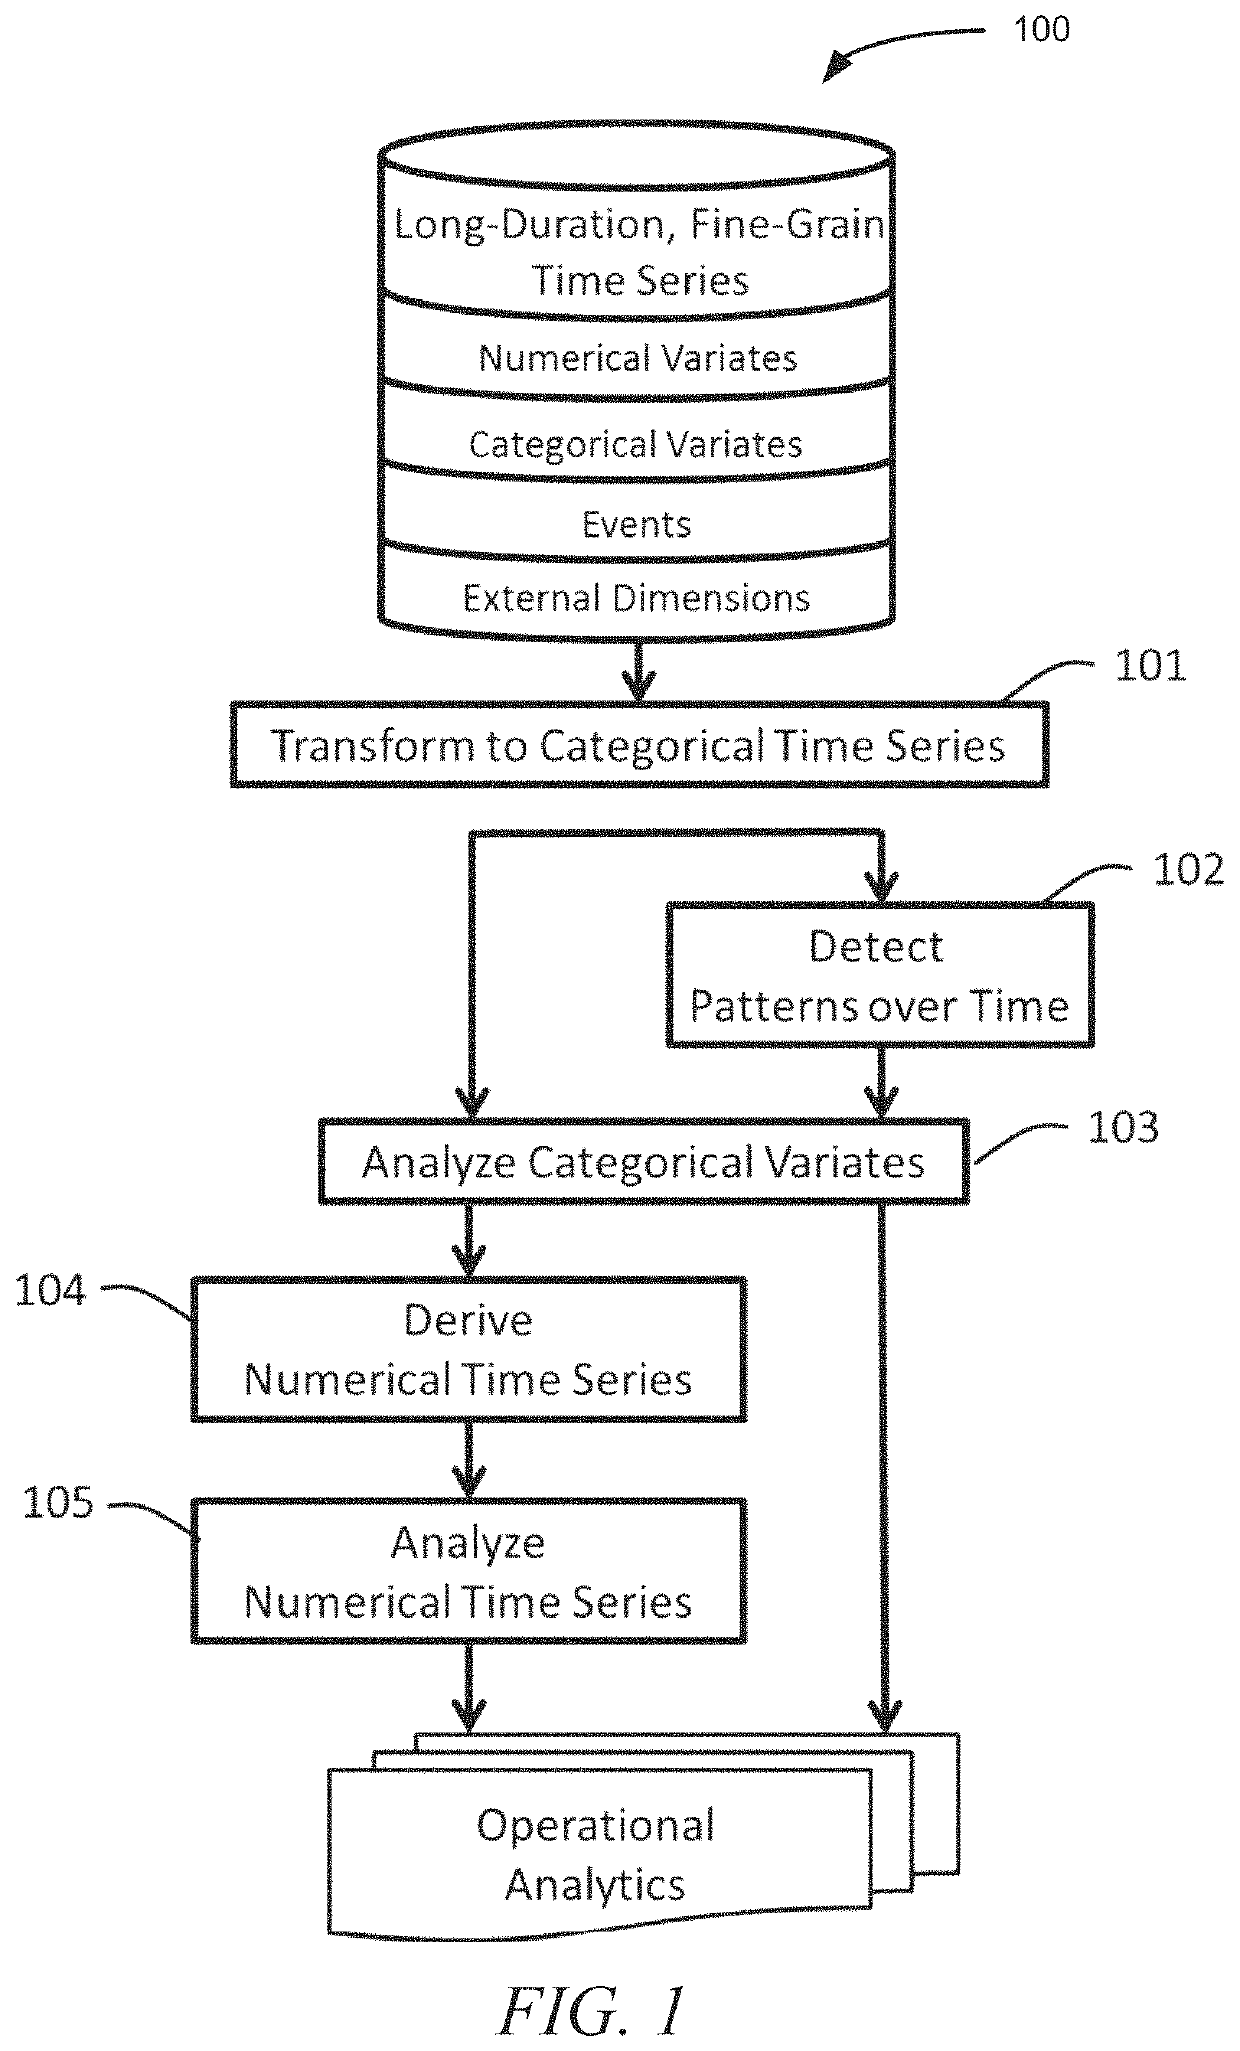 Long-duration time series operational analytics